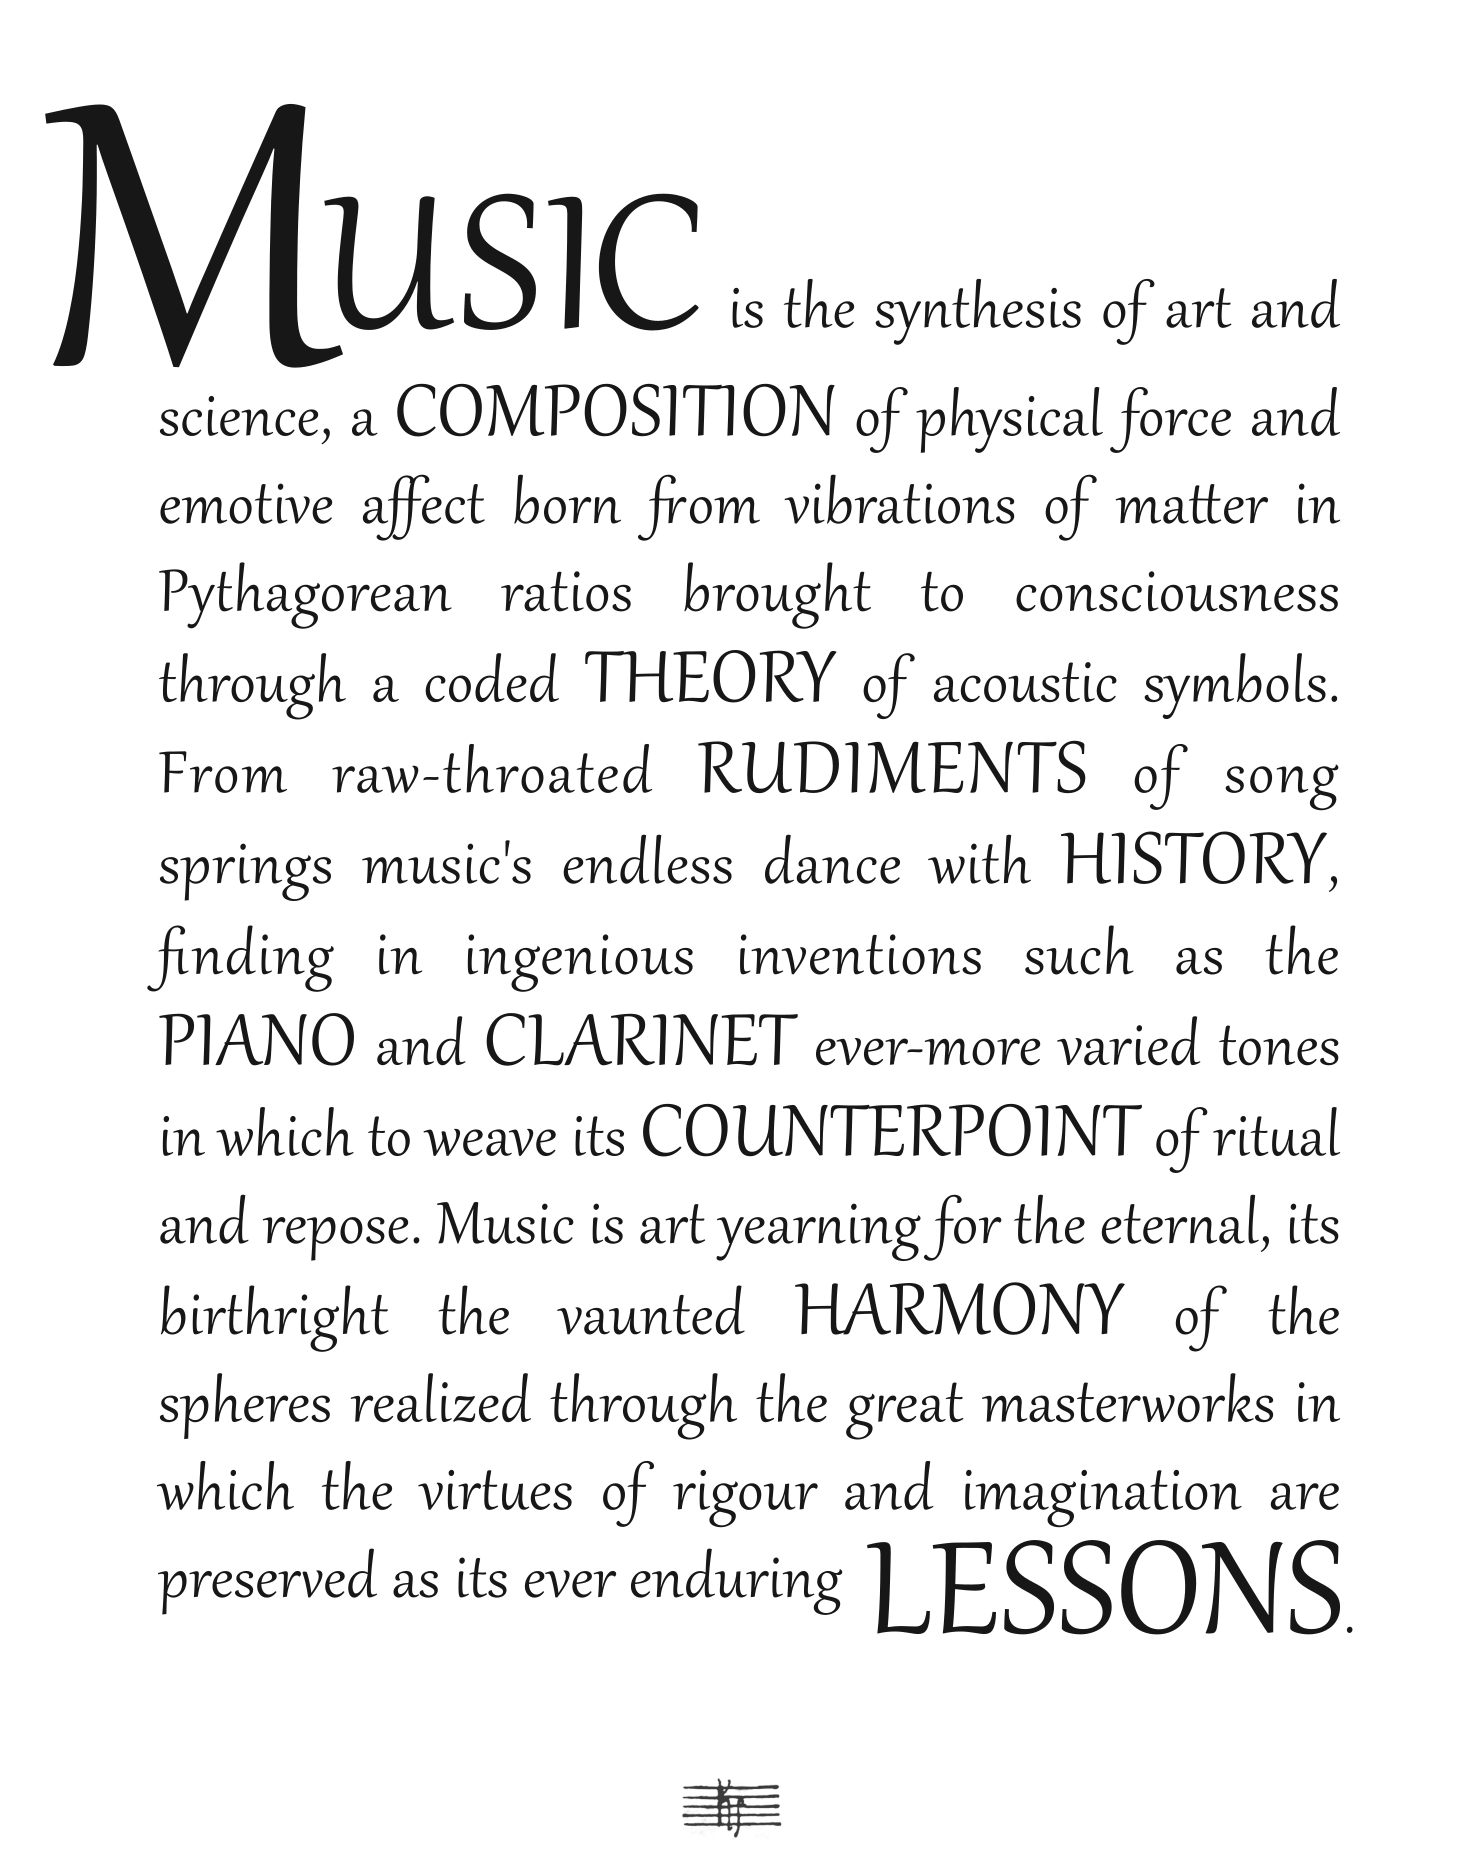 MUSIC is the synthesis of art and science, a COMPOSITION of physical force and emotive affect born from vibrations of matter in Pythagorean ratios brought to consciousness through a coded THEORY of acoustic symbols. From raw-throated RUDIMENTS of song springs music's endless dance with HISTORY, finding in ingenious inventions such as the PIANO and CLARINET ever-more varied tones in which to weave its COUNTERPOINT of ritual and repose. Music is art yearning for the eternal, its birthright the vaunted HARMONY of the spheres realized through the great masterworks in which the virtues of rigour and imagination are preserved as its ever enduring LESSONS.